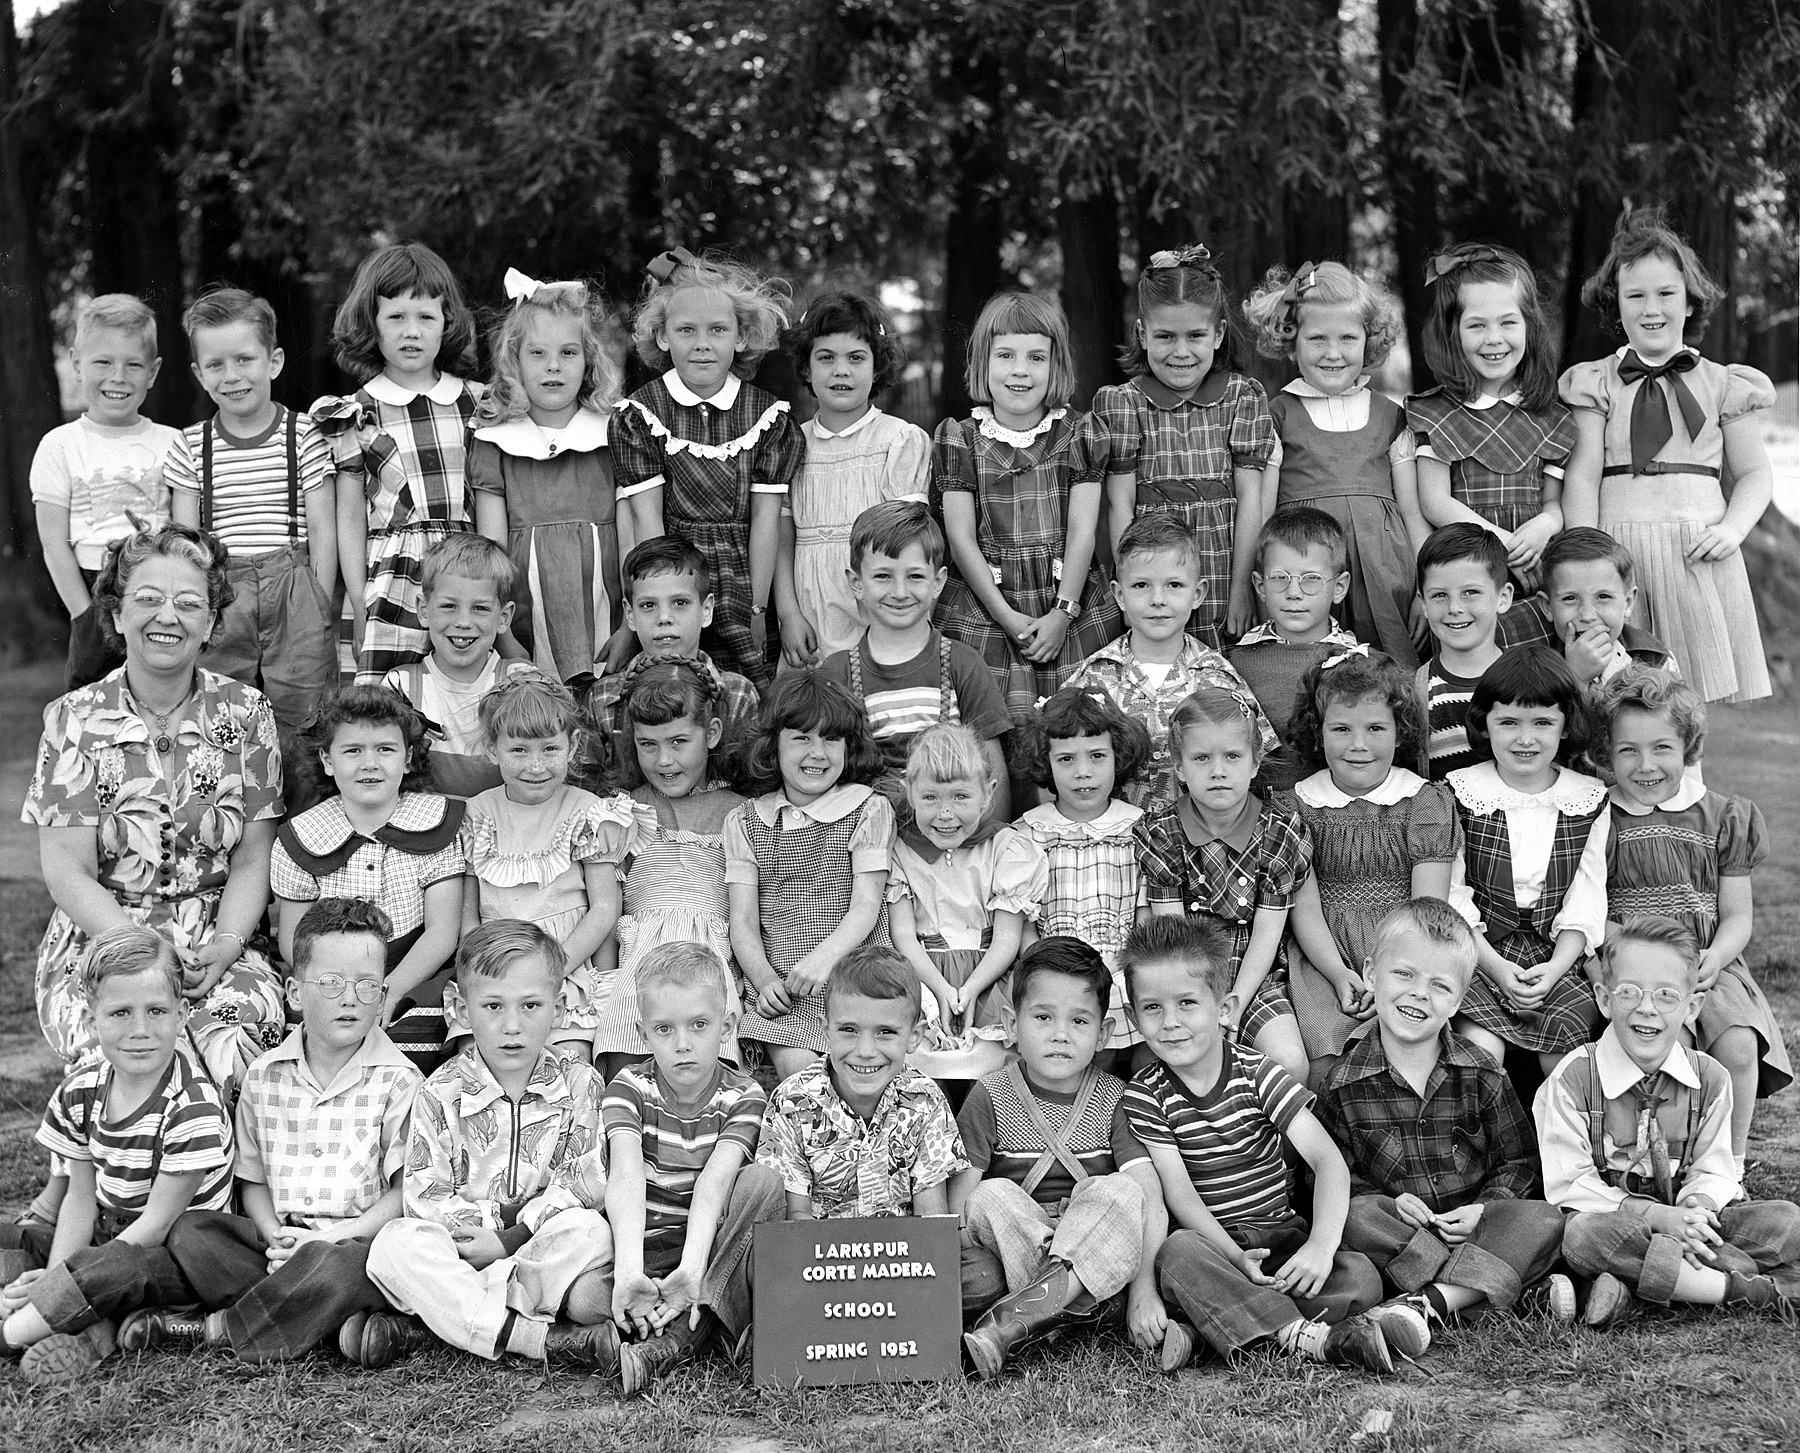 Baby boomers, first wave, all born 1946, showing how we were dressed for kindergarten. Notice how we don't look like gang members, convicts or concentration camp inmates. Of course, for class photo day, most of us had probably gotten decked out a bit better than normally, but still. By the following year a new school had opened up in Corte Madera and our class size shrank dramatically. That's me at the bottom right. View full size.